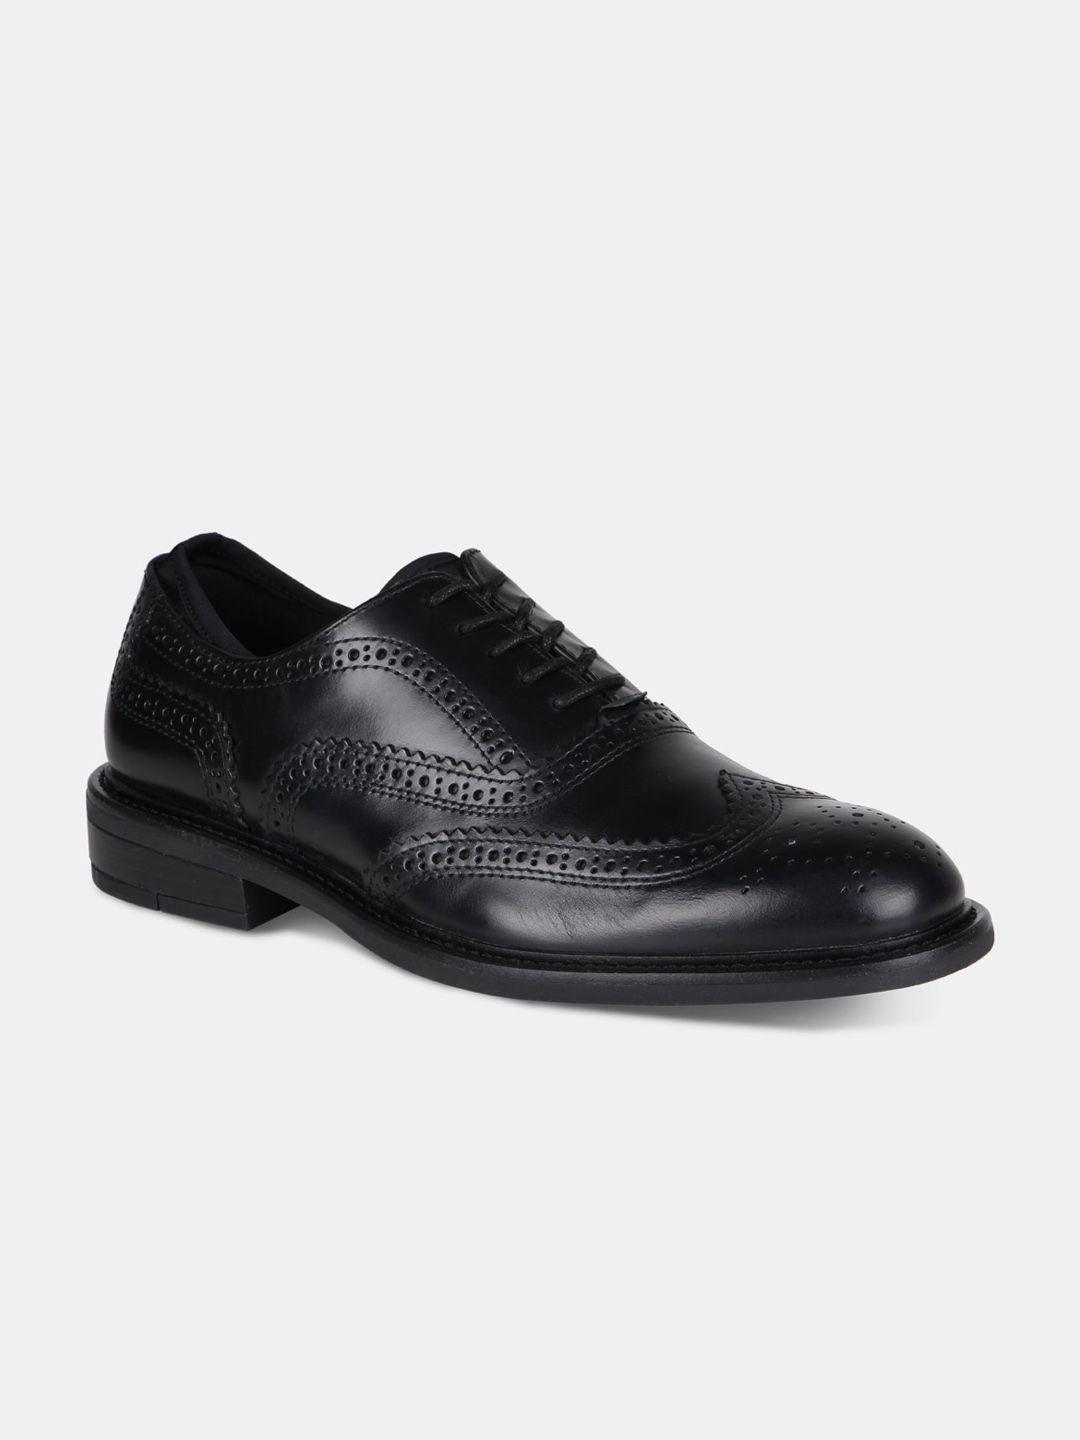 kenneth-cole-men-black-textured-leather-formal-brogues